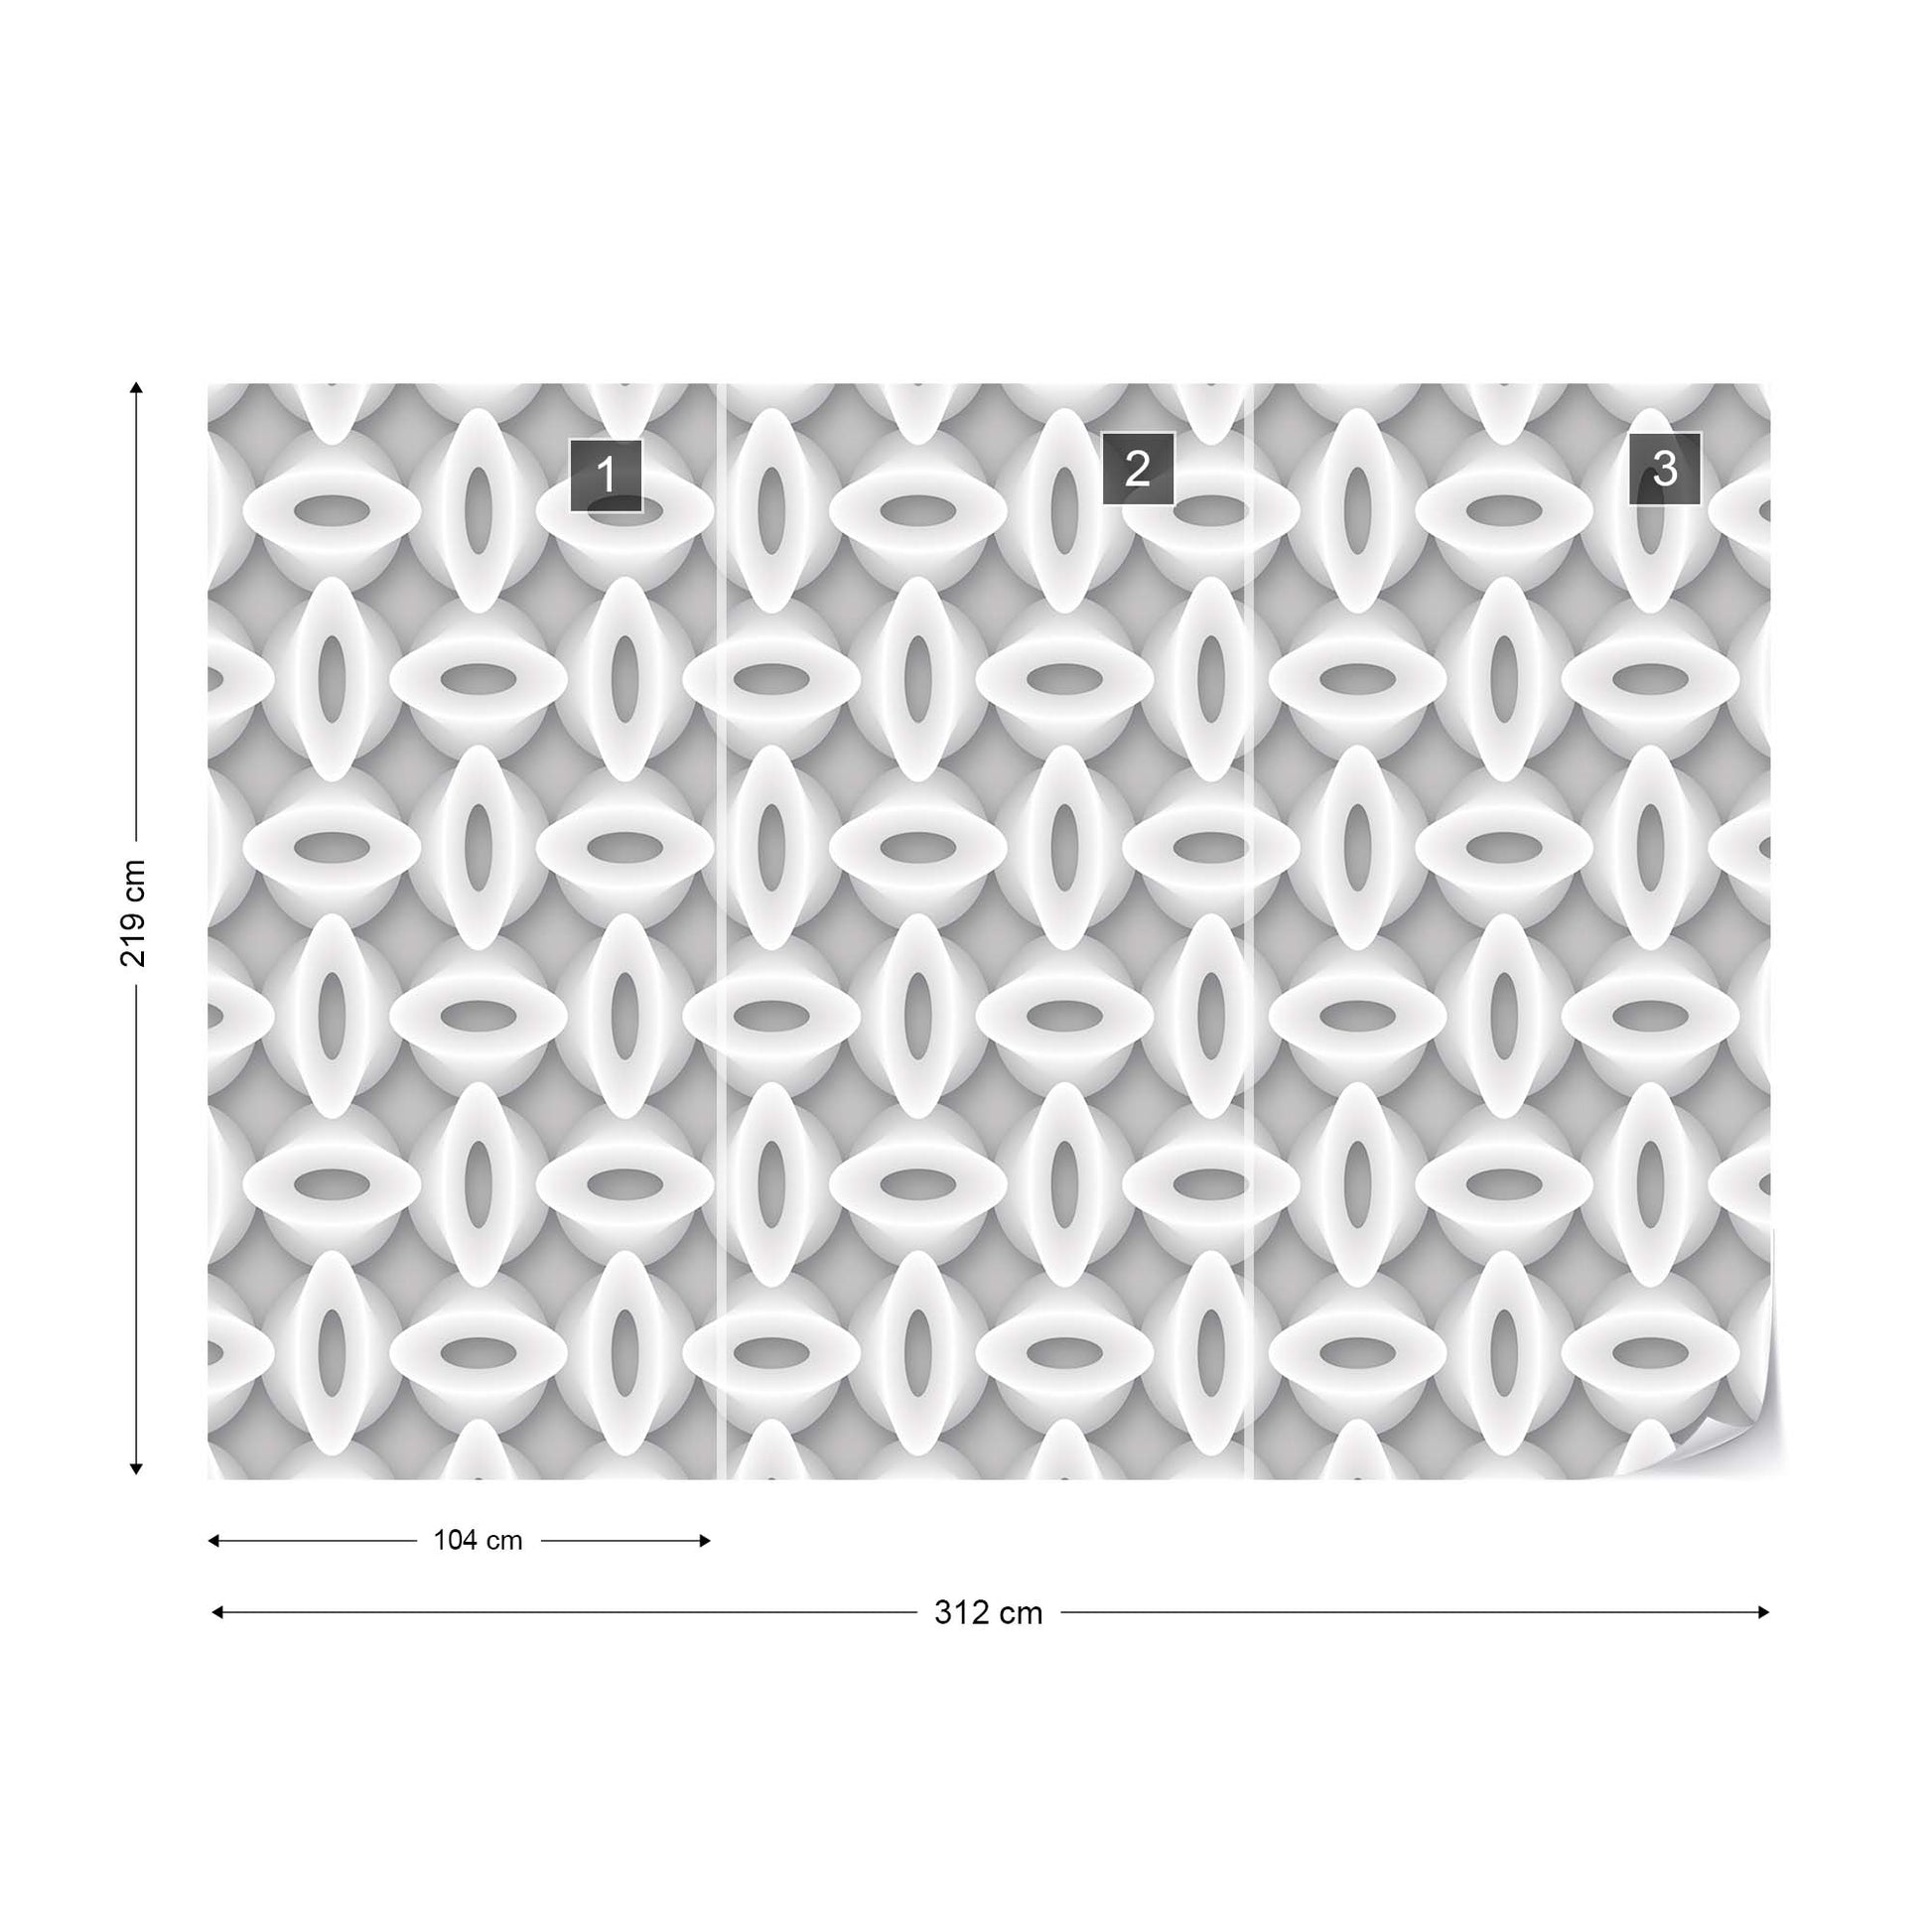 3D Abstract Pattern Grey And White Photo Wallpaper Wall Mural - USTAD HOME